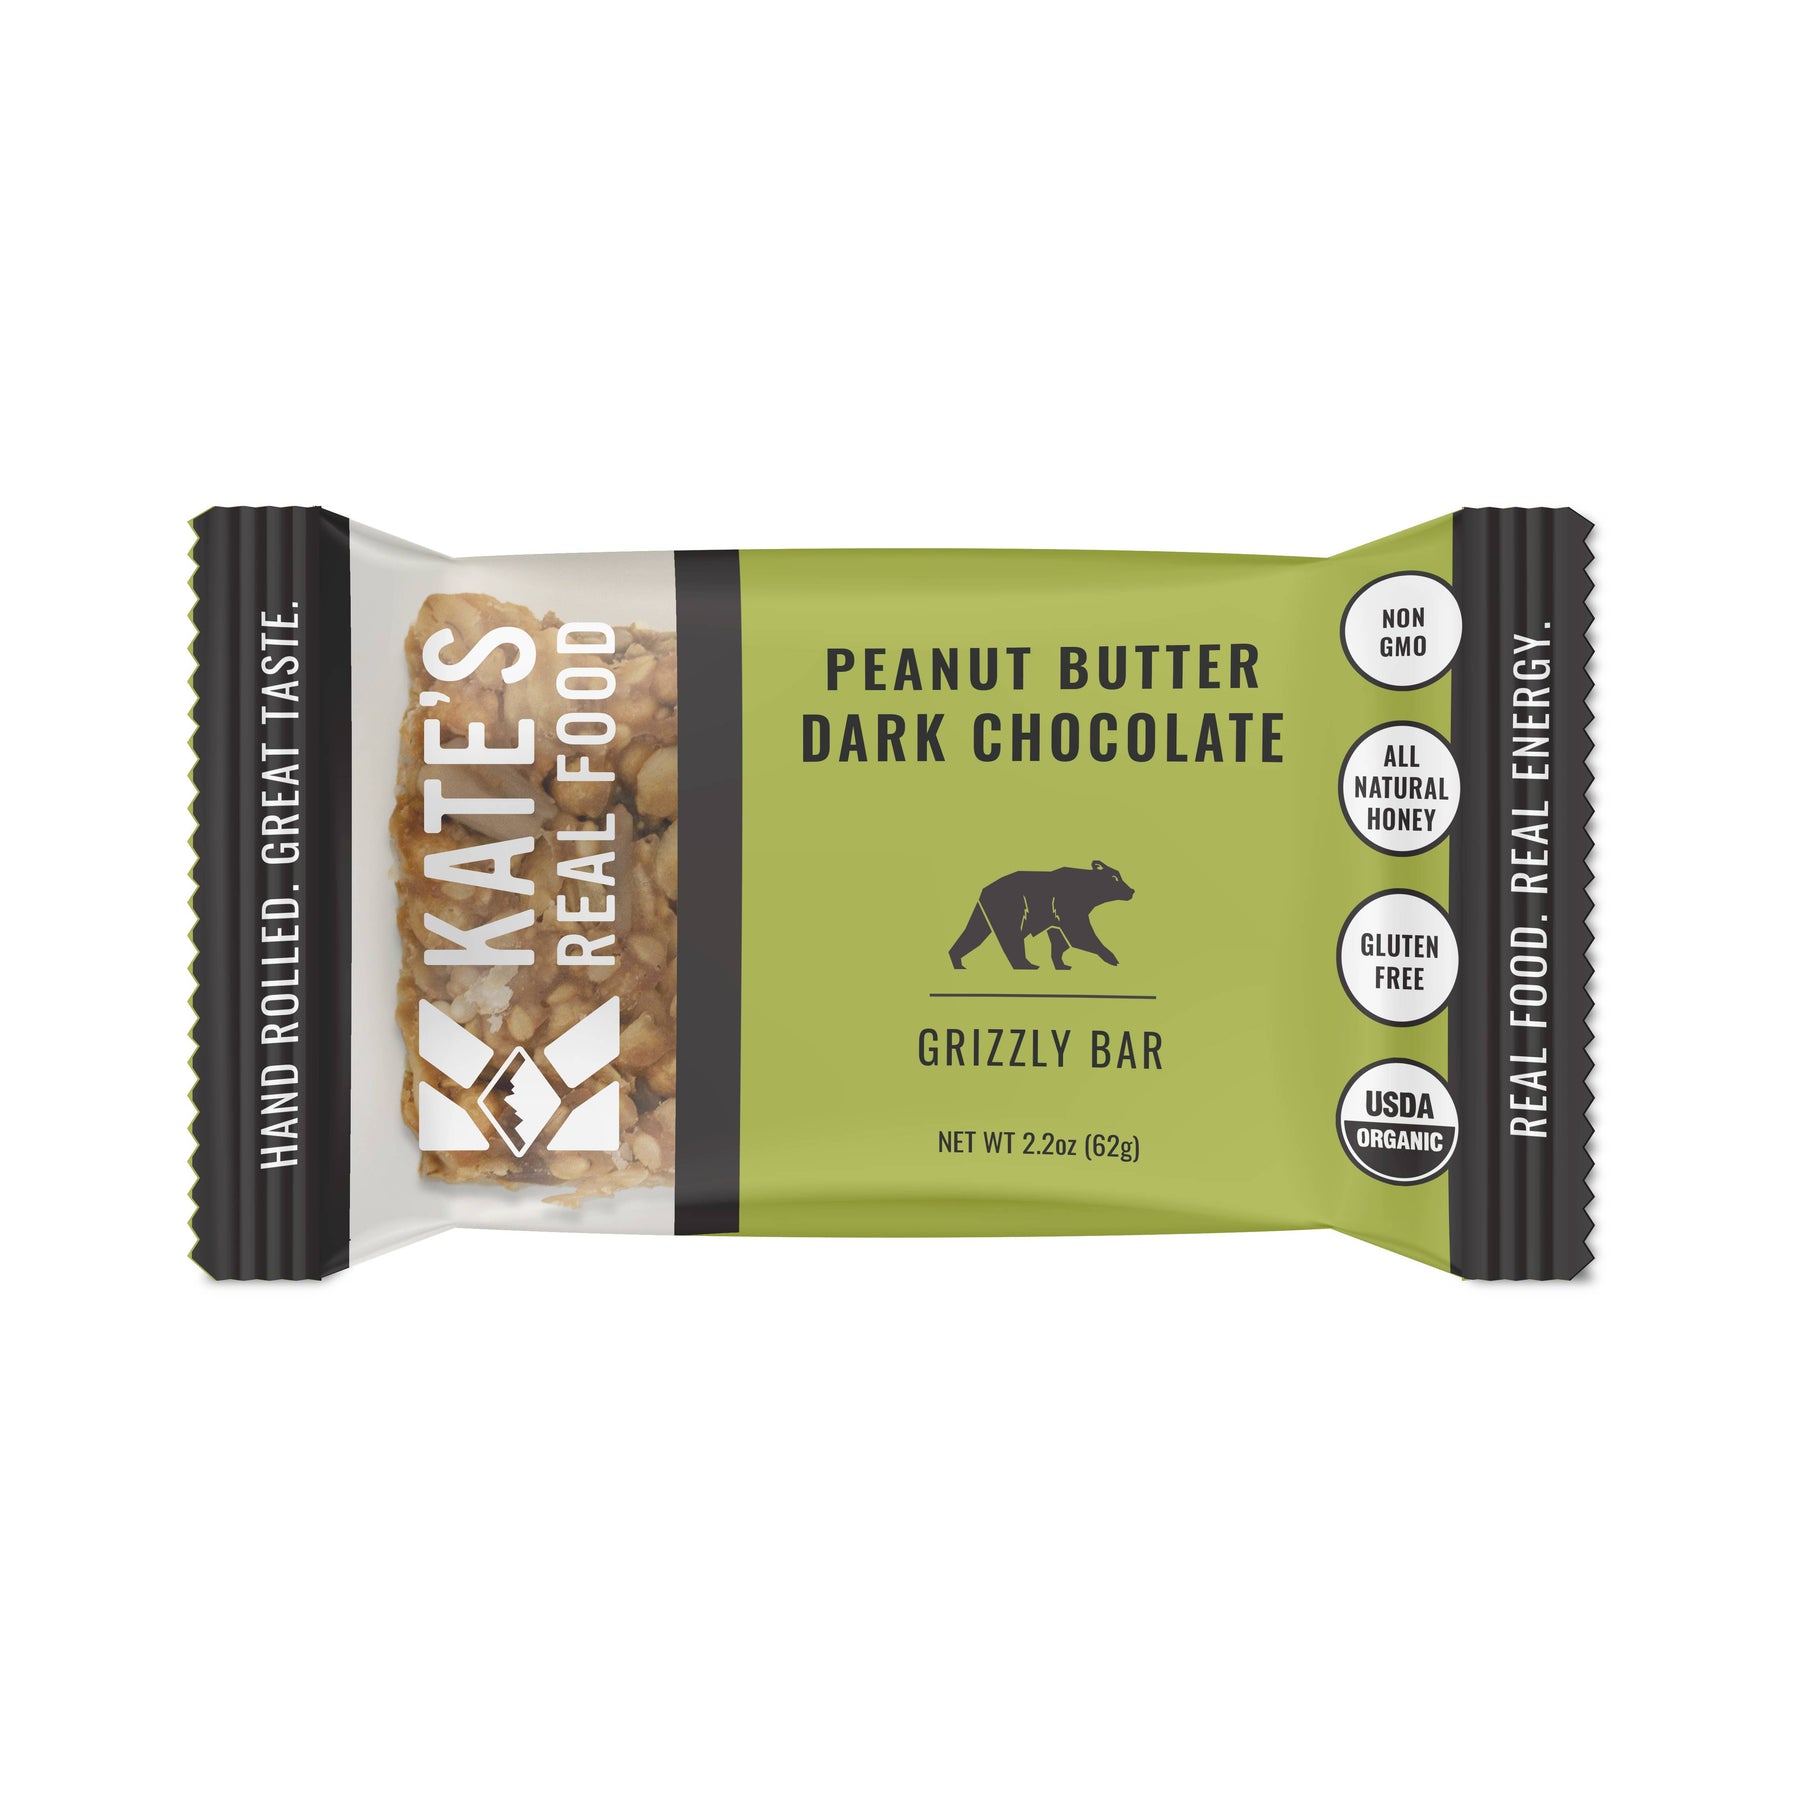 Kate's Real Food "Grizzly" Peanut Butter Chocolate Bar 2.2oz